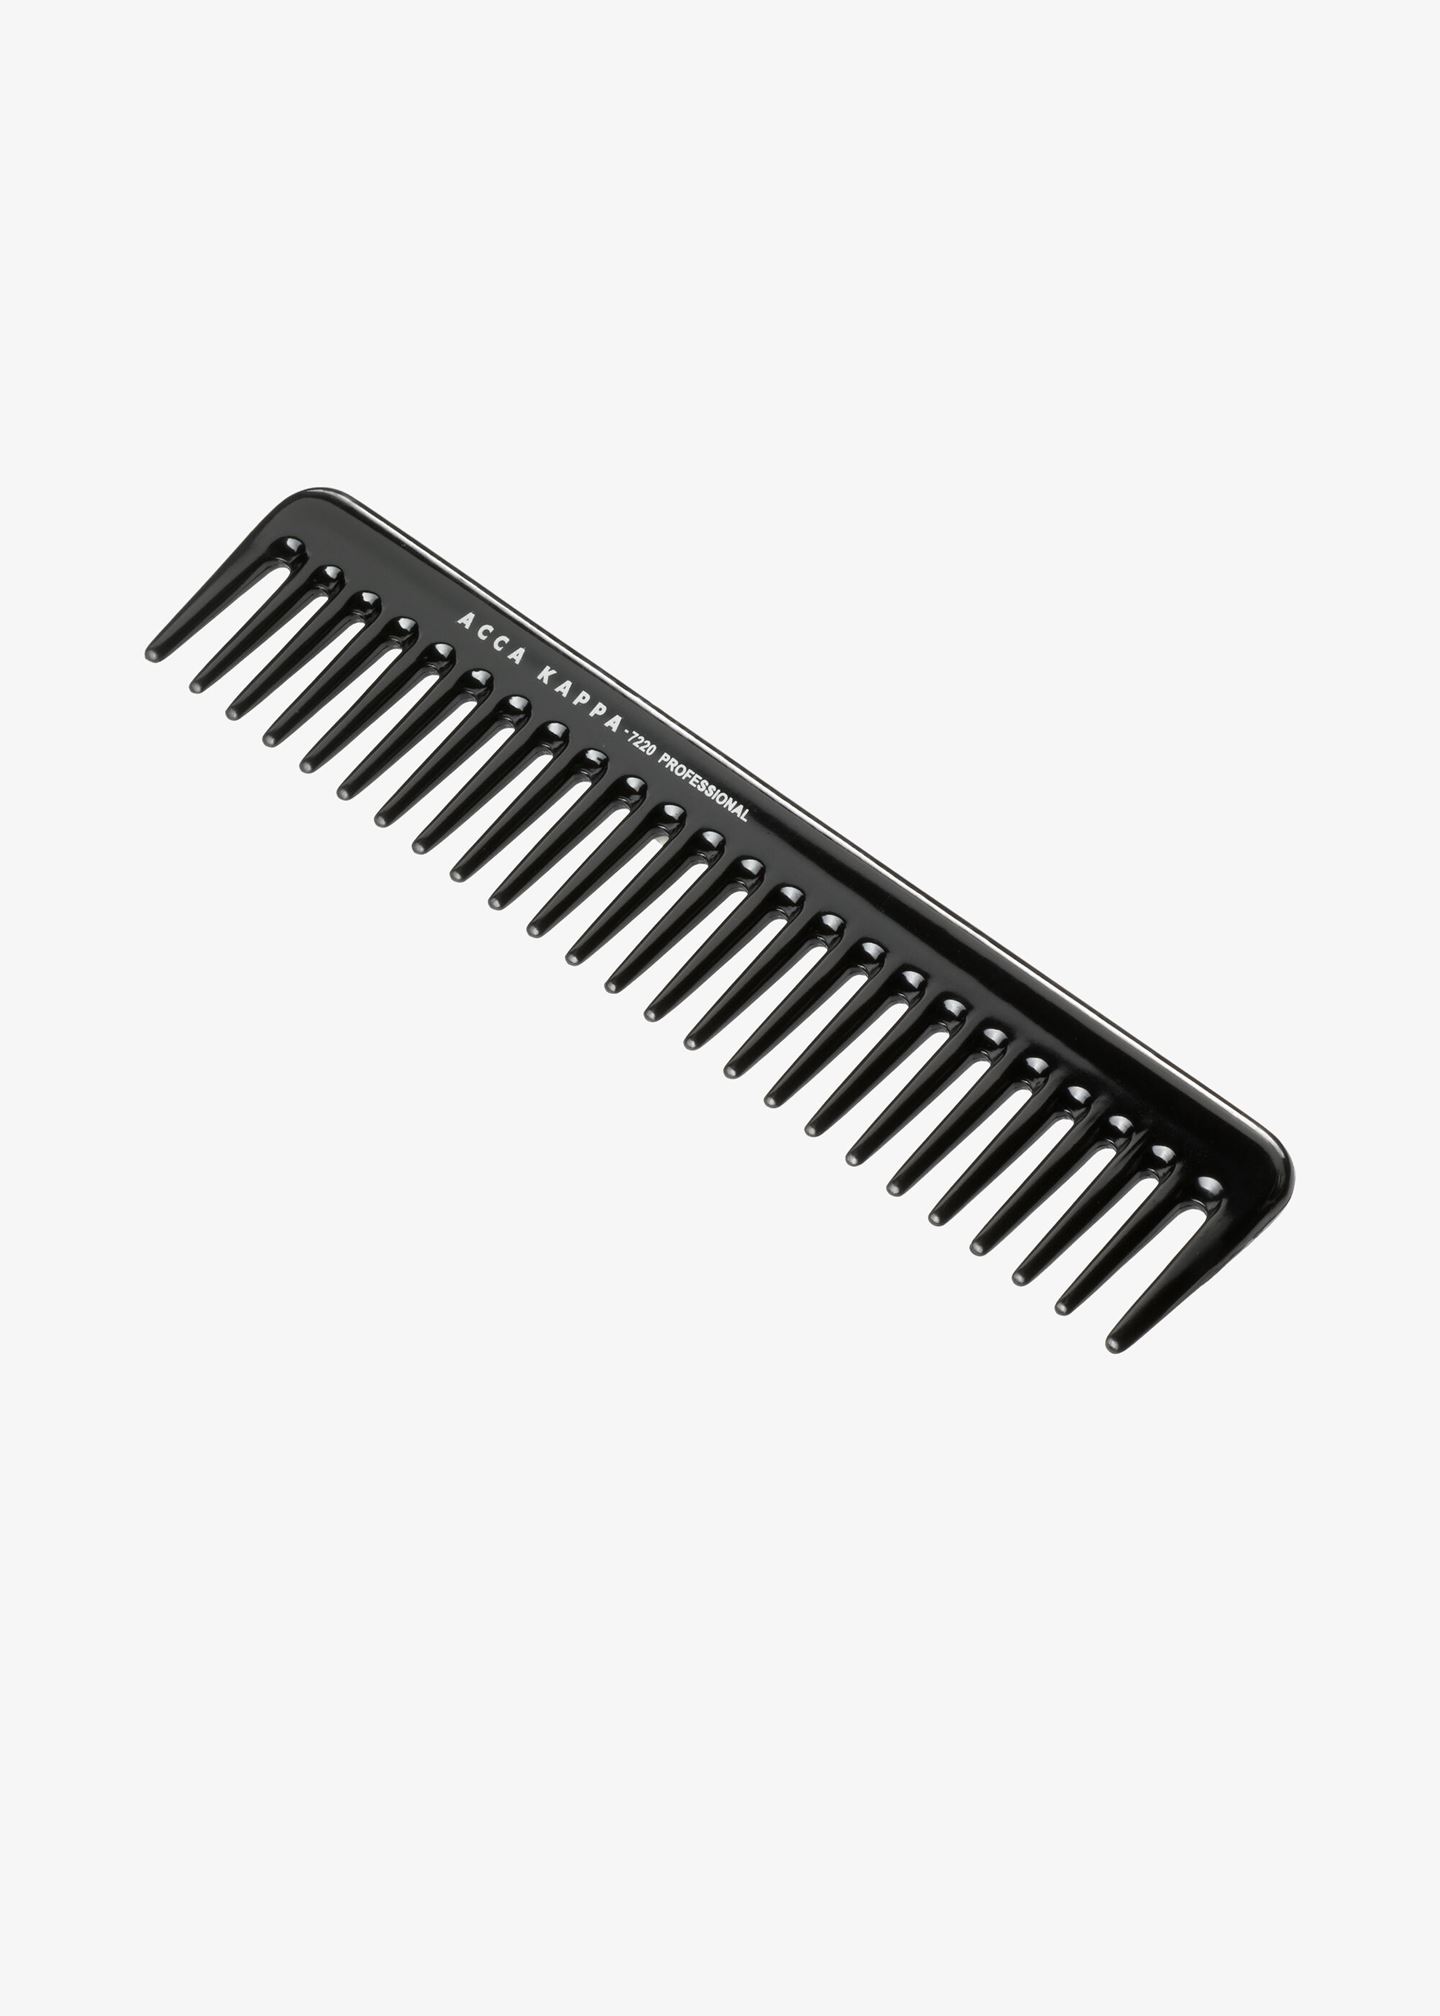 Kamm Carbonium Comb for Mesh and Drying